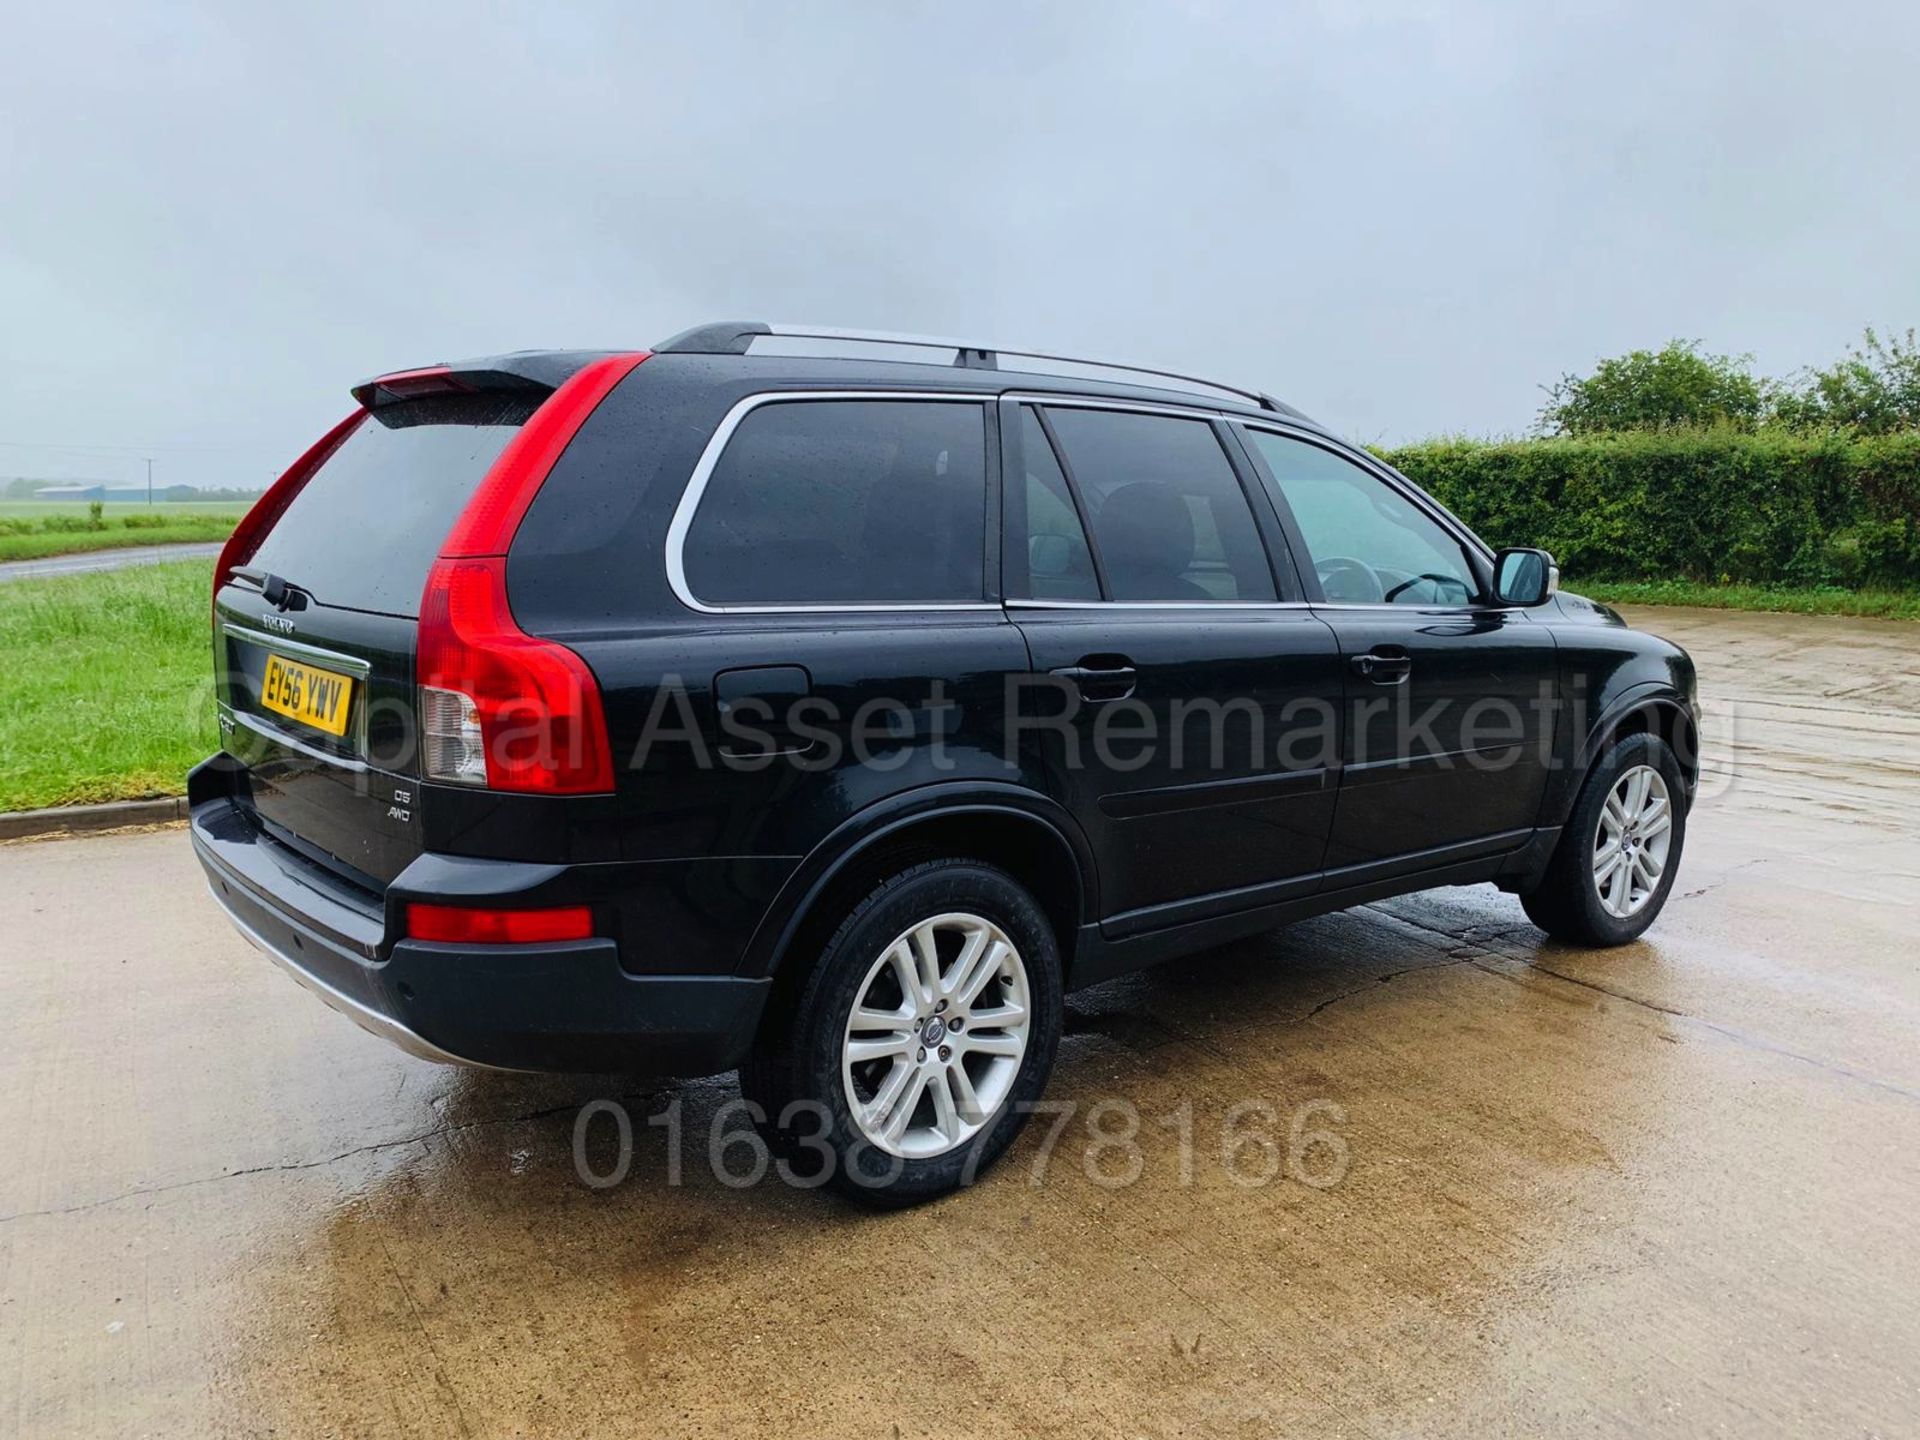 VOLVO XC90 *SE LUX - EDITION* 7 SEATER SUV (2007 MODEL) '2.4 DIESEL - 185 BHP - AUTO' *FULLY LOADED* - Image 9 of 37